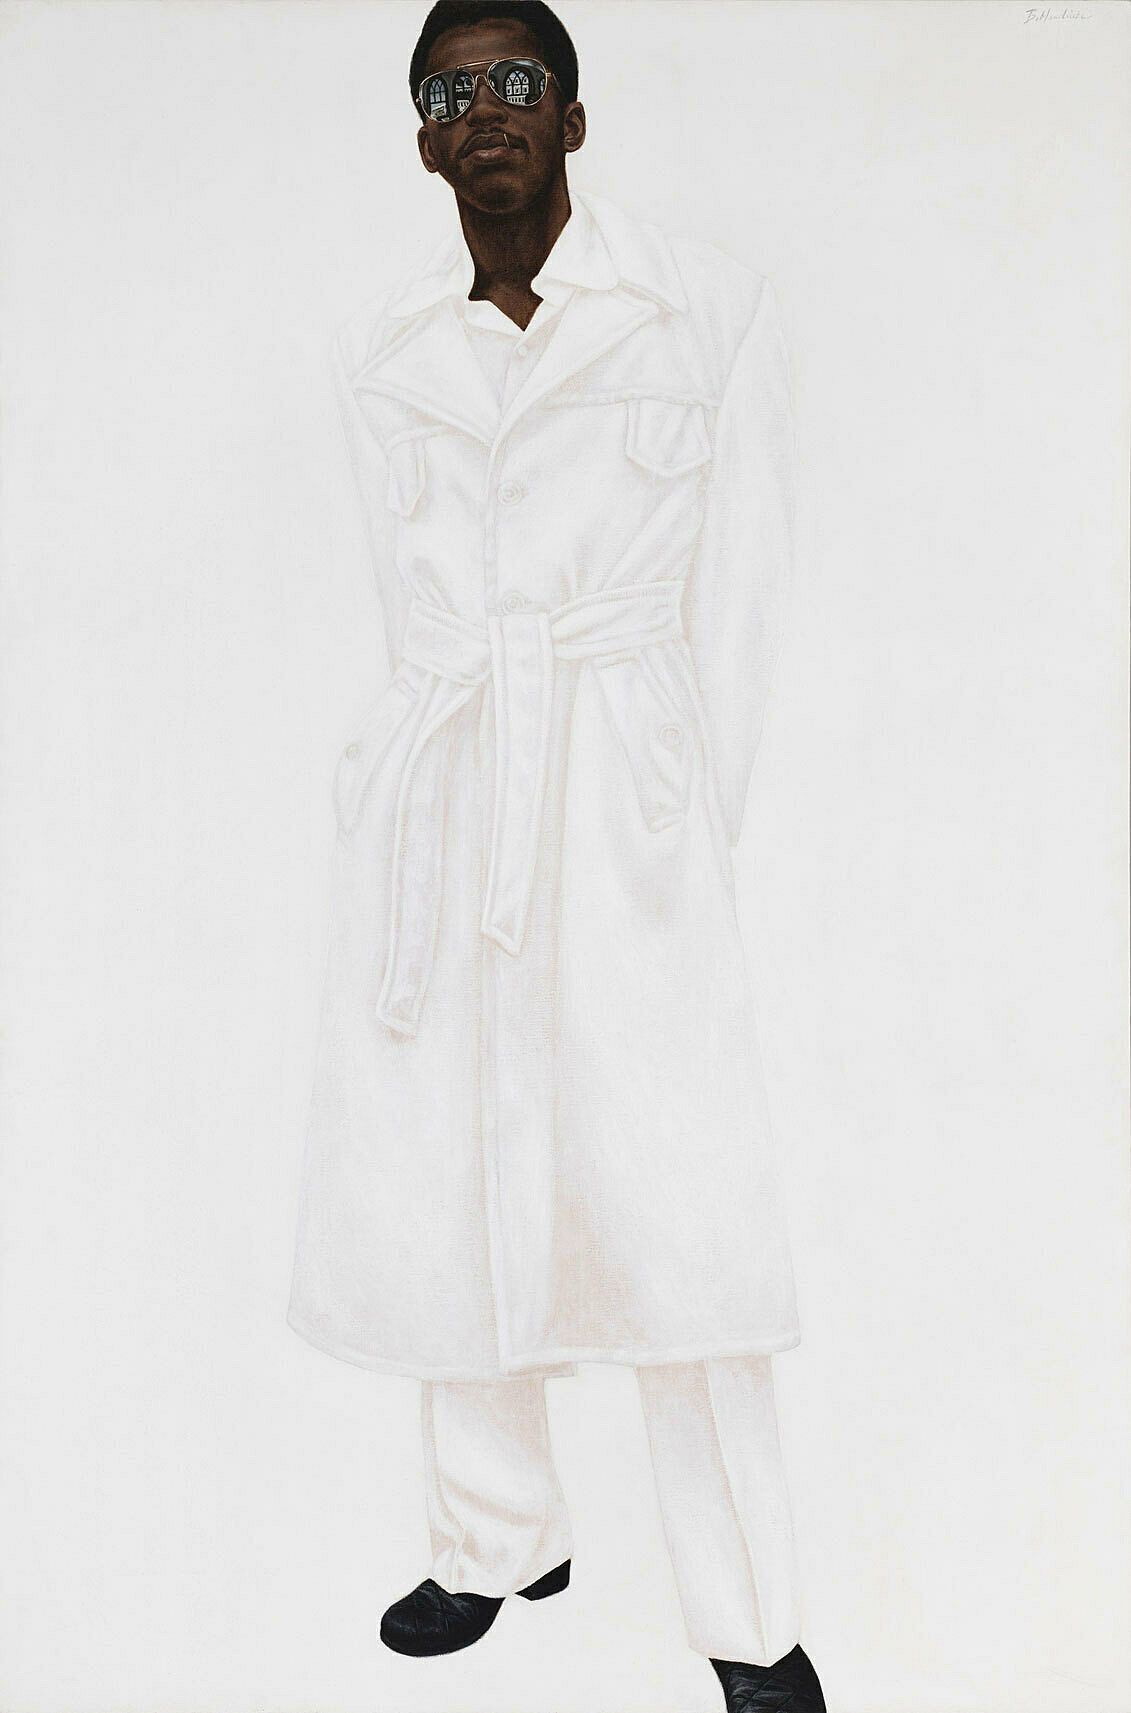 A work by Barkley Hendricks. A portrait of a man dressed head-to-toe in a suit wearing sunglasses